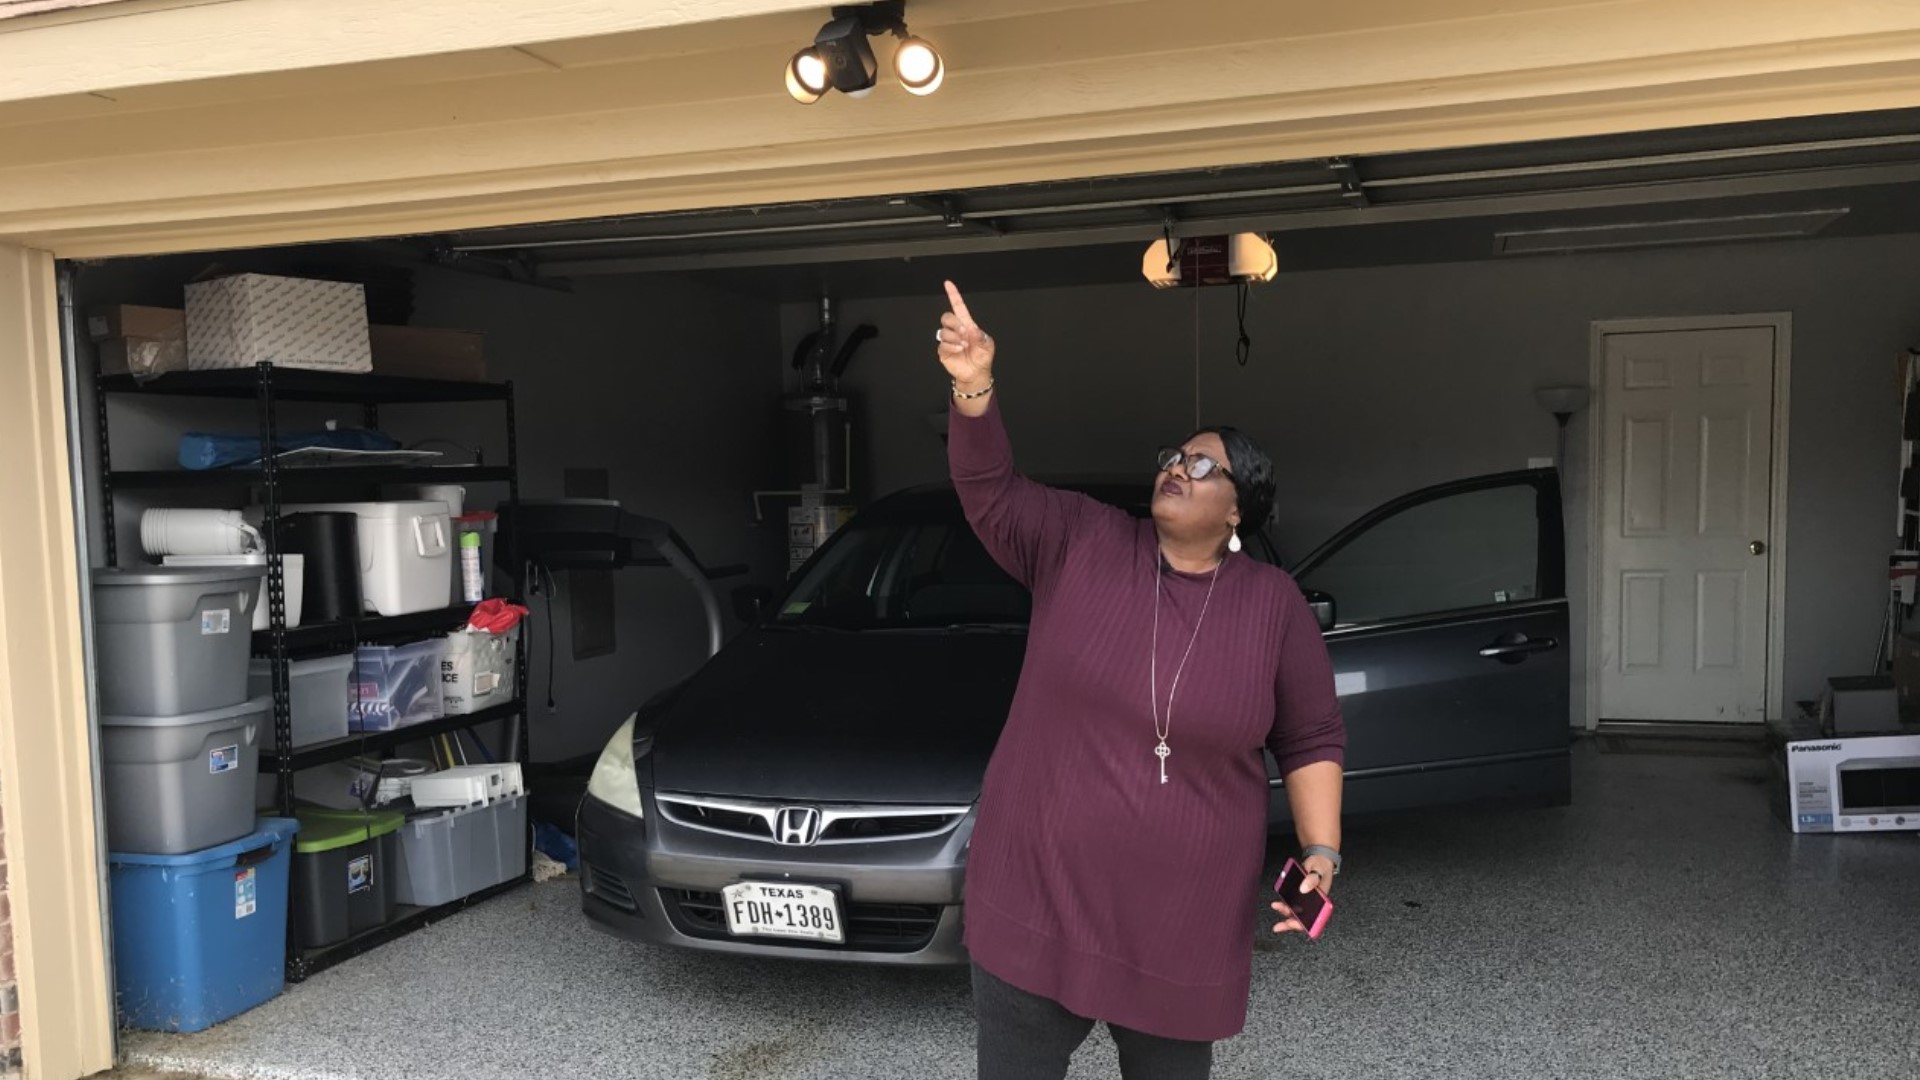 Sandra Robinson recently brought her third Ring camera. She realized the new device was connected to someone else she doesn't know.